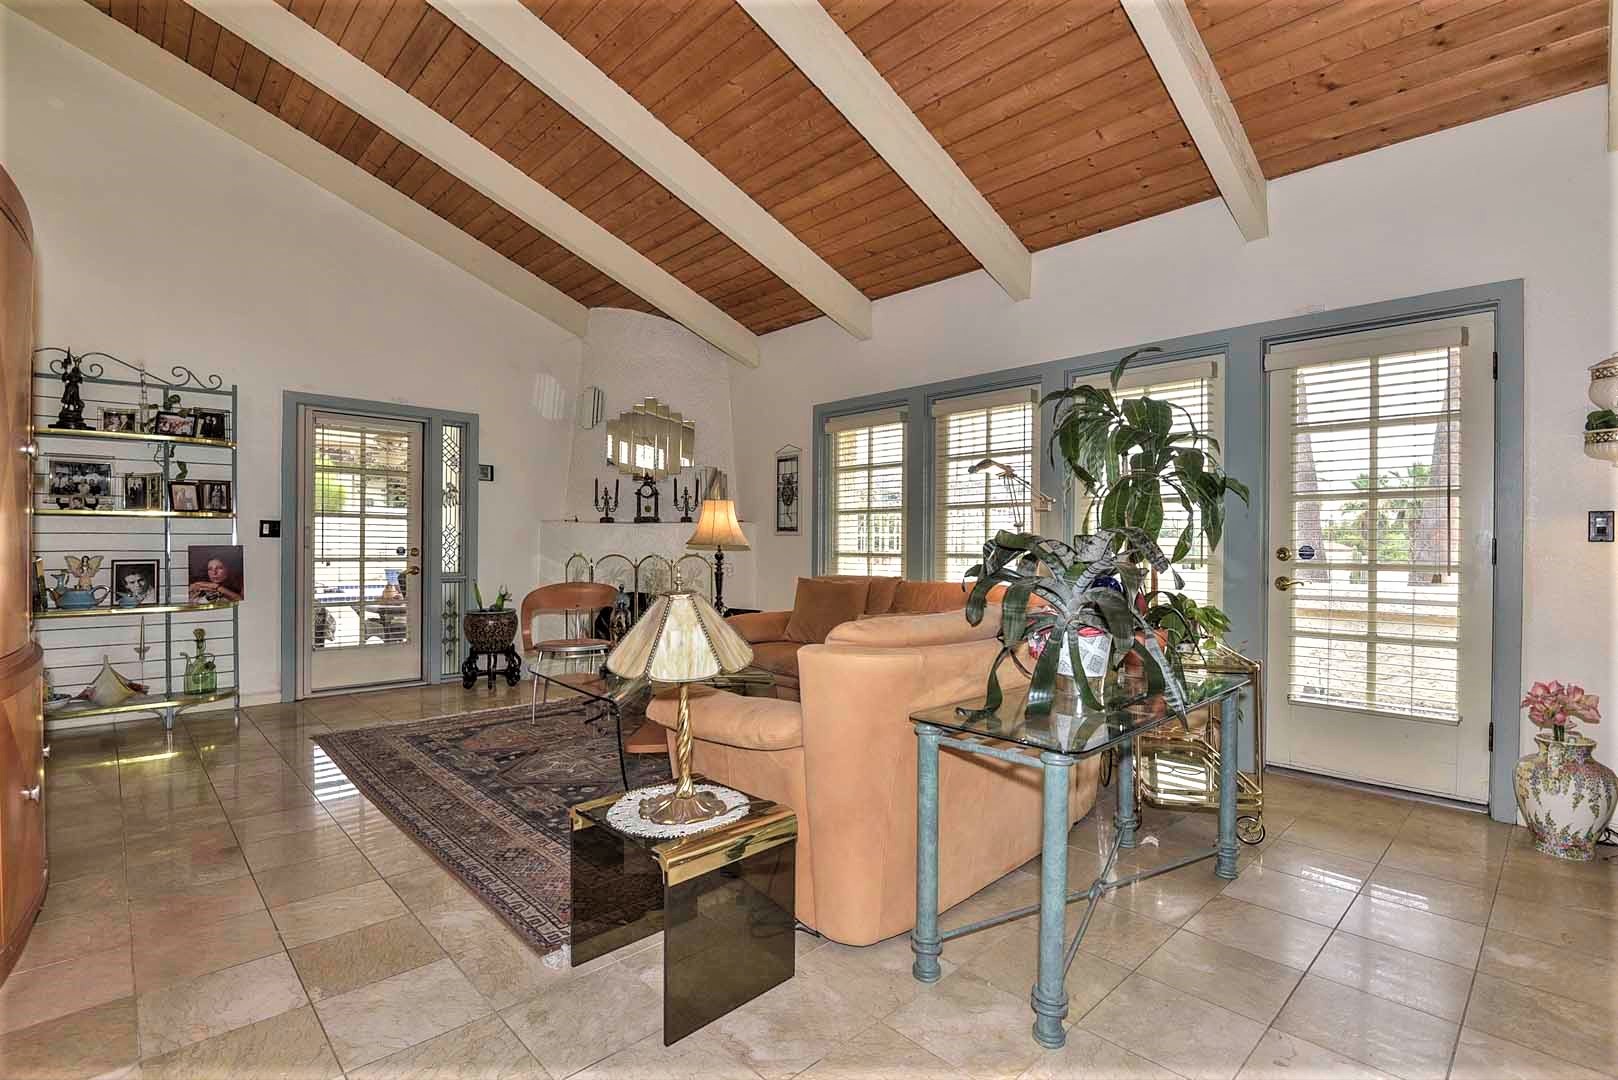 Spacious Family Room with Vaulted Ceiling